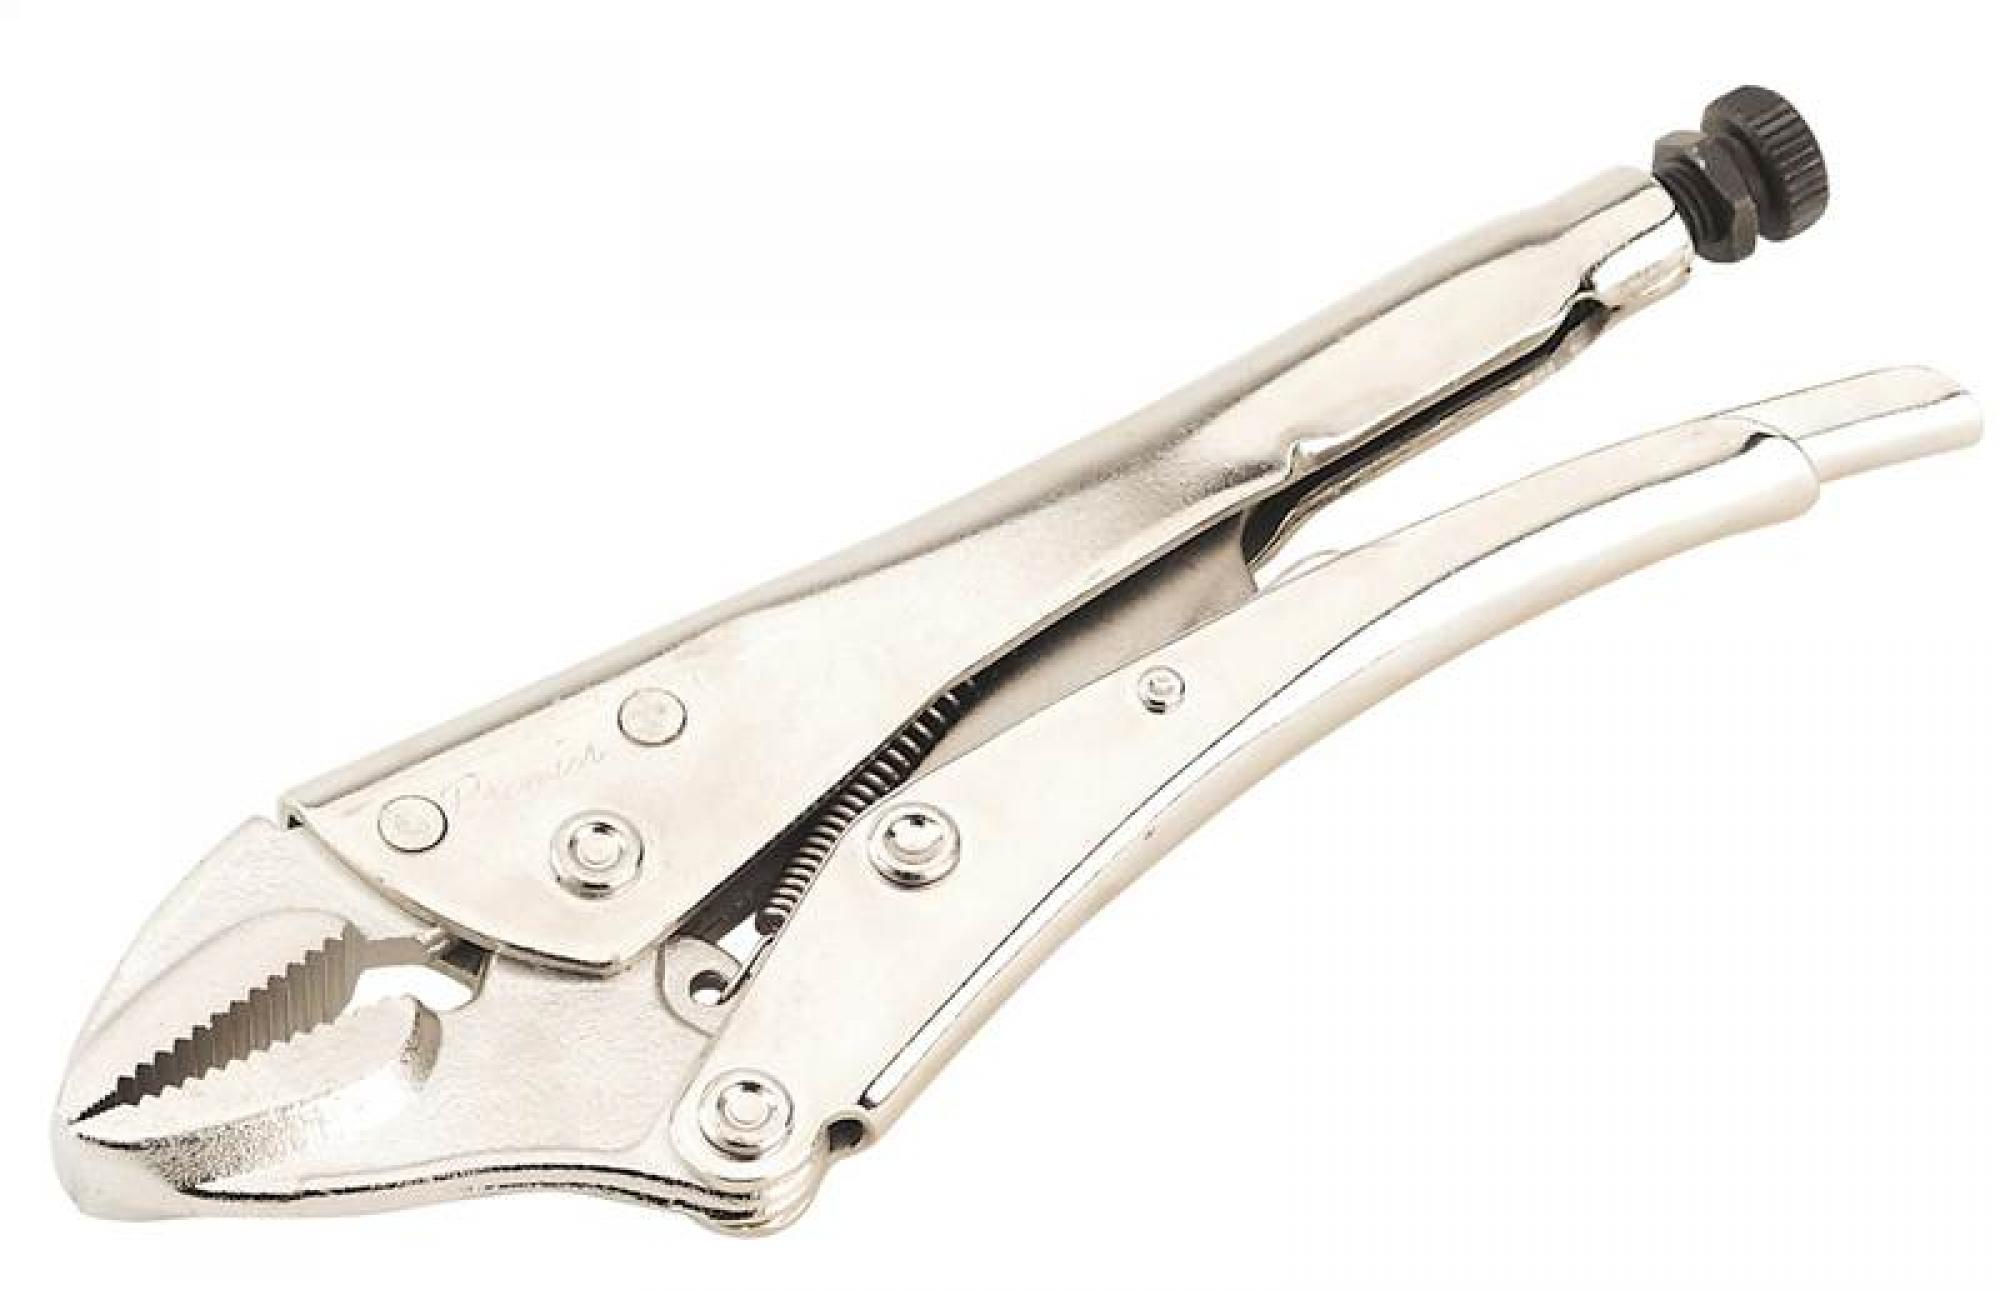 Buy Sealey 235mm Locking Pliers Straight Jaws AK6823 from Fane Valley ...